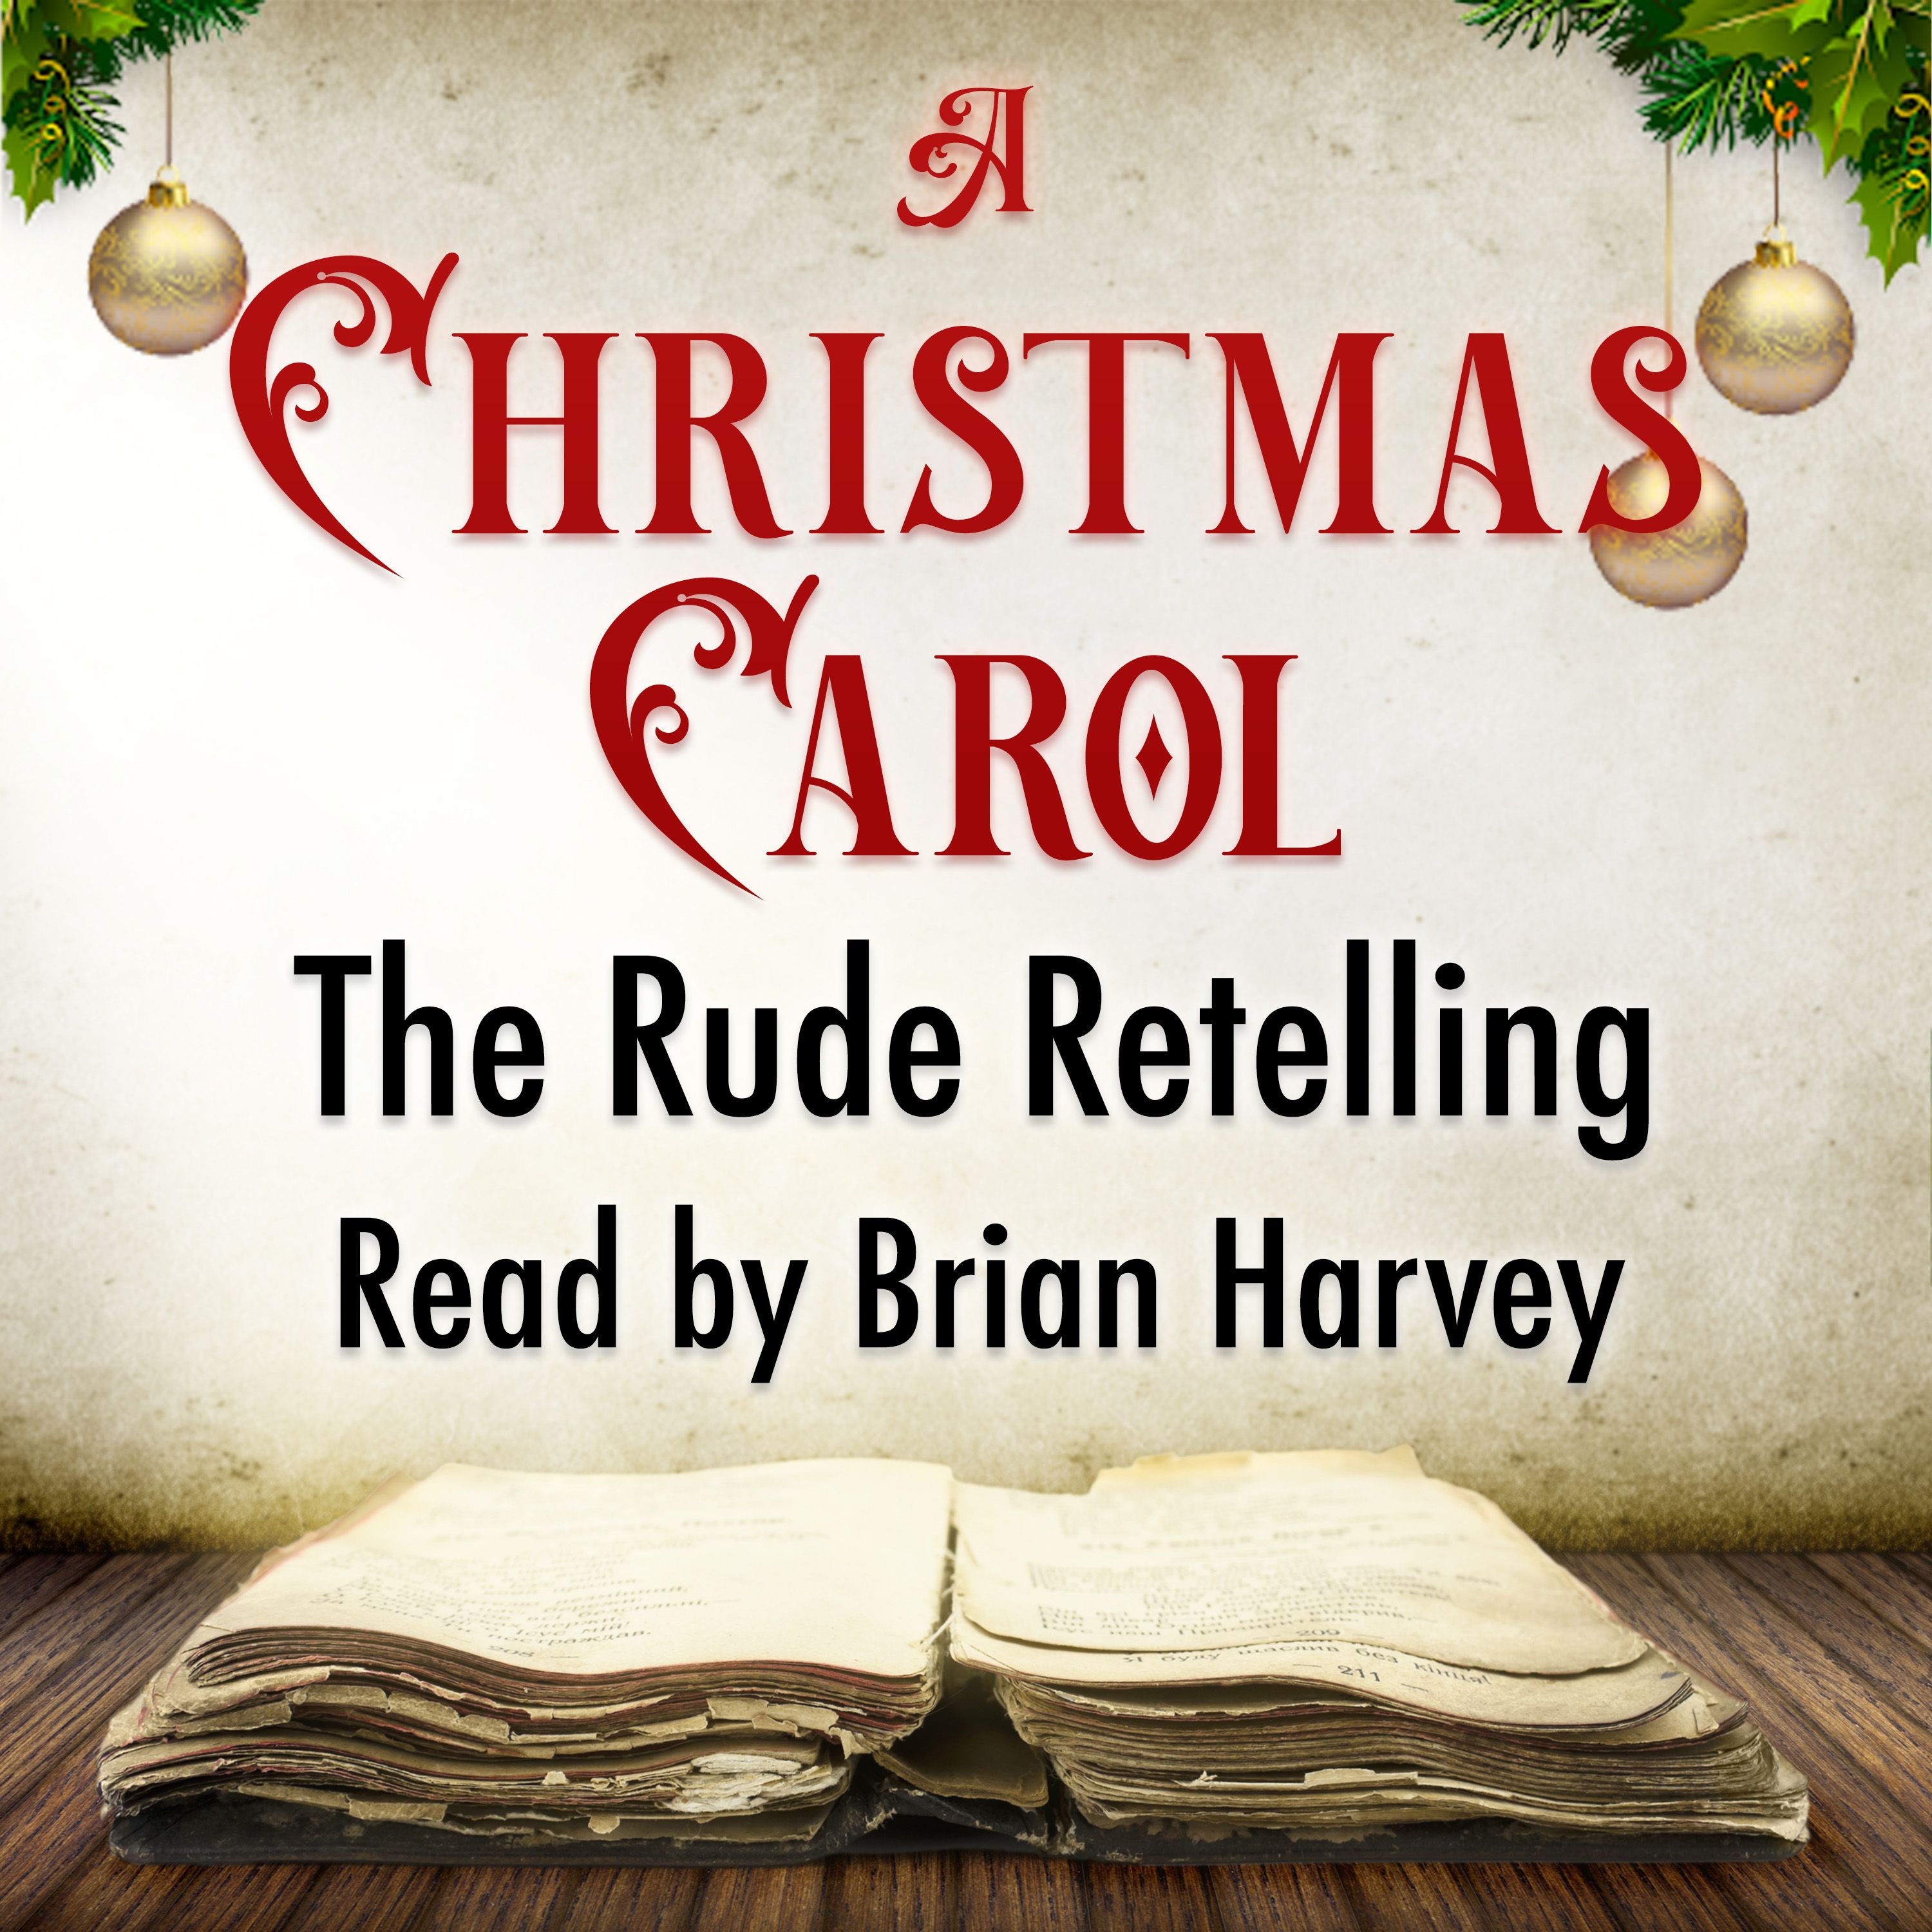 A Christmas Carol: Chapter 1 - The Counting House